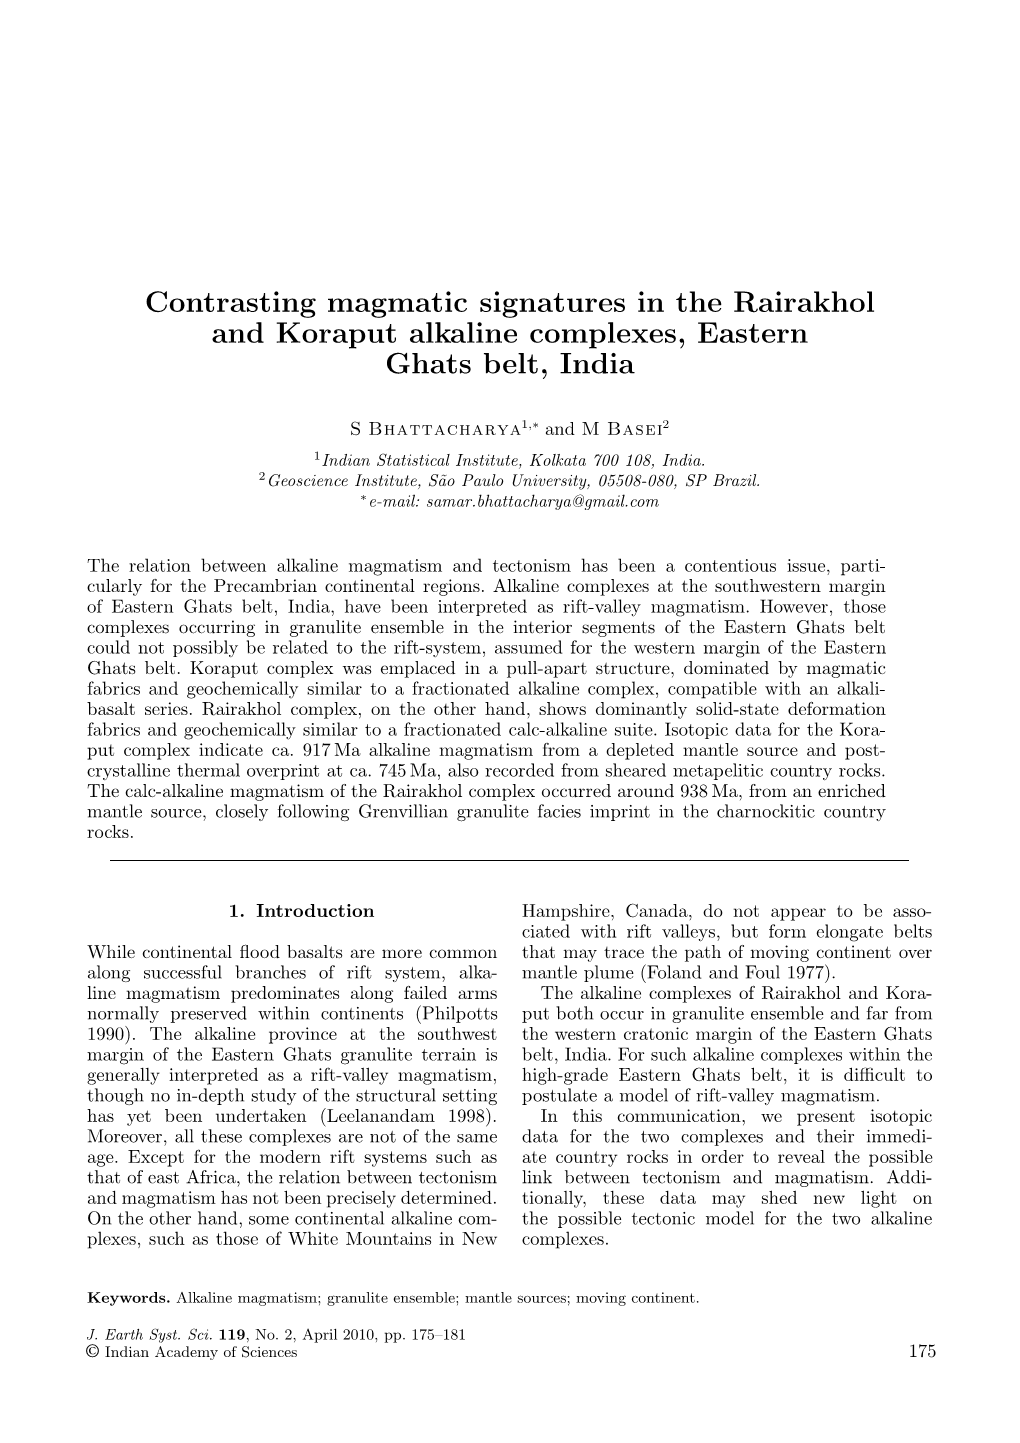 Contrasting Magmatic Signatures in the Rairakhol and Koraput Alkaline Complexes, Eastern Ghats Belt, India